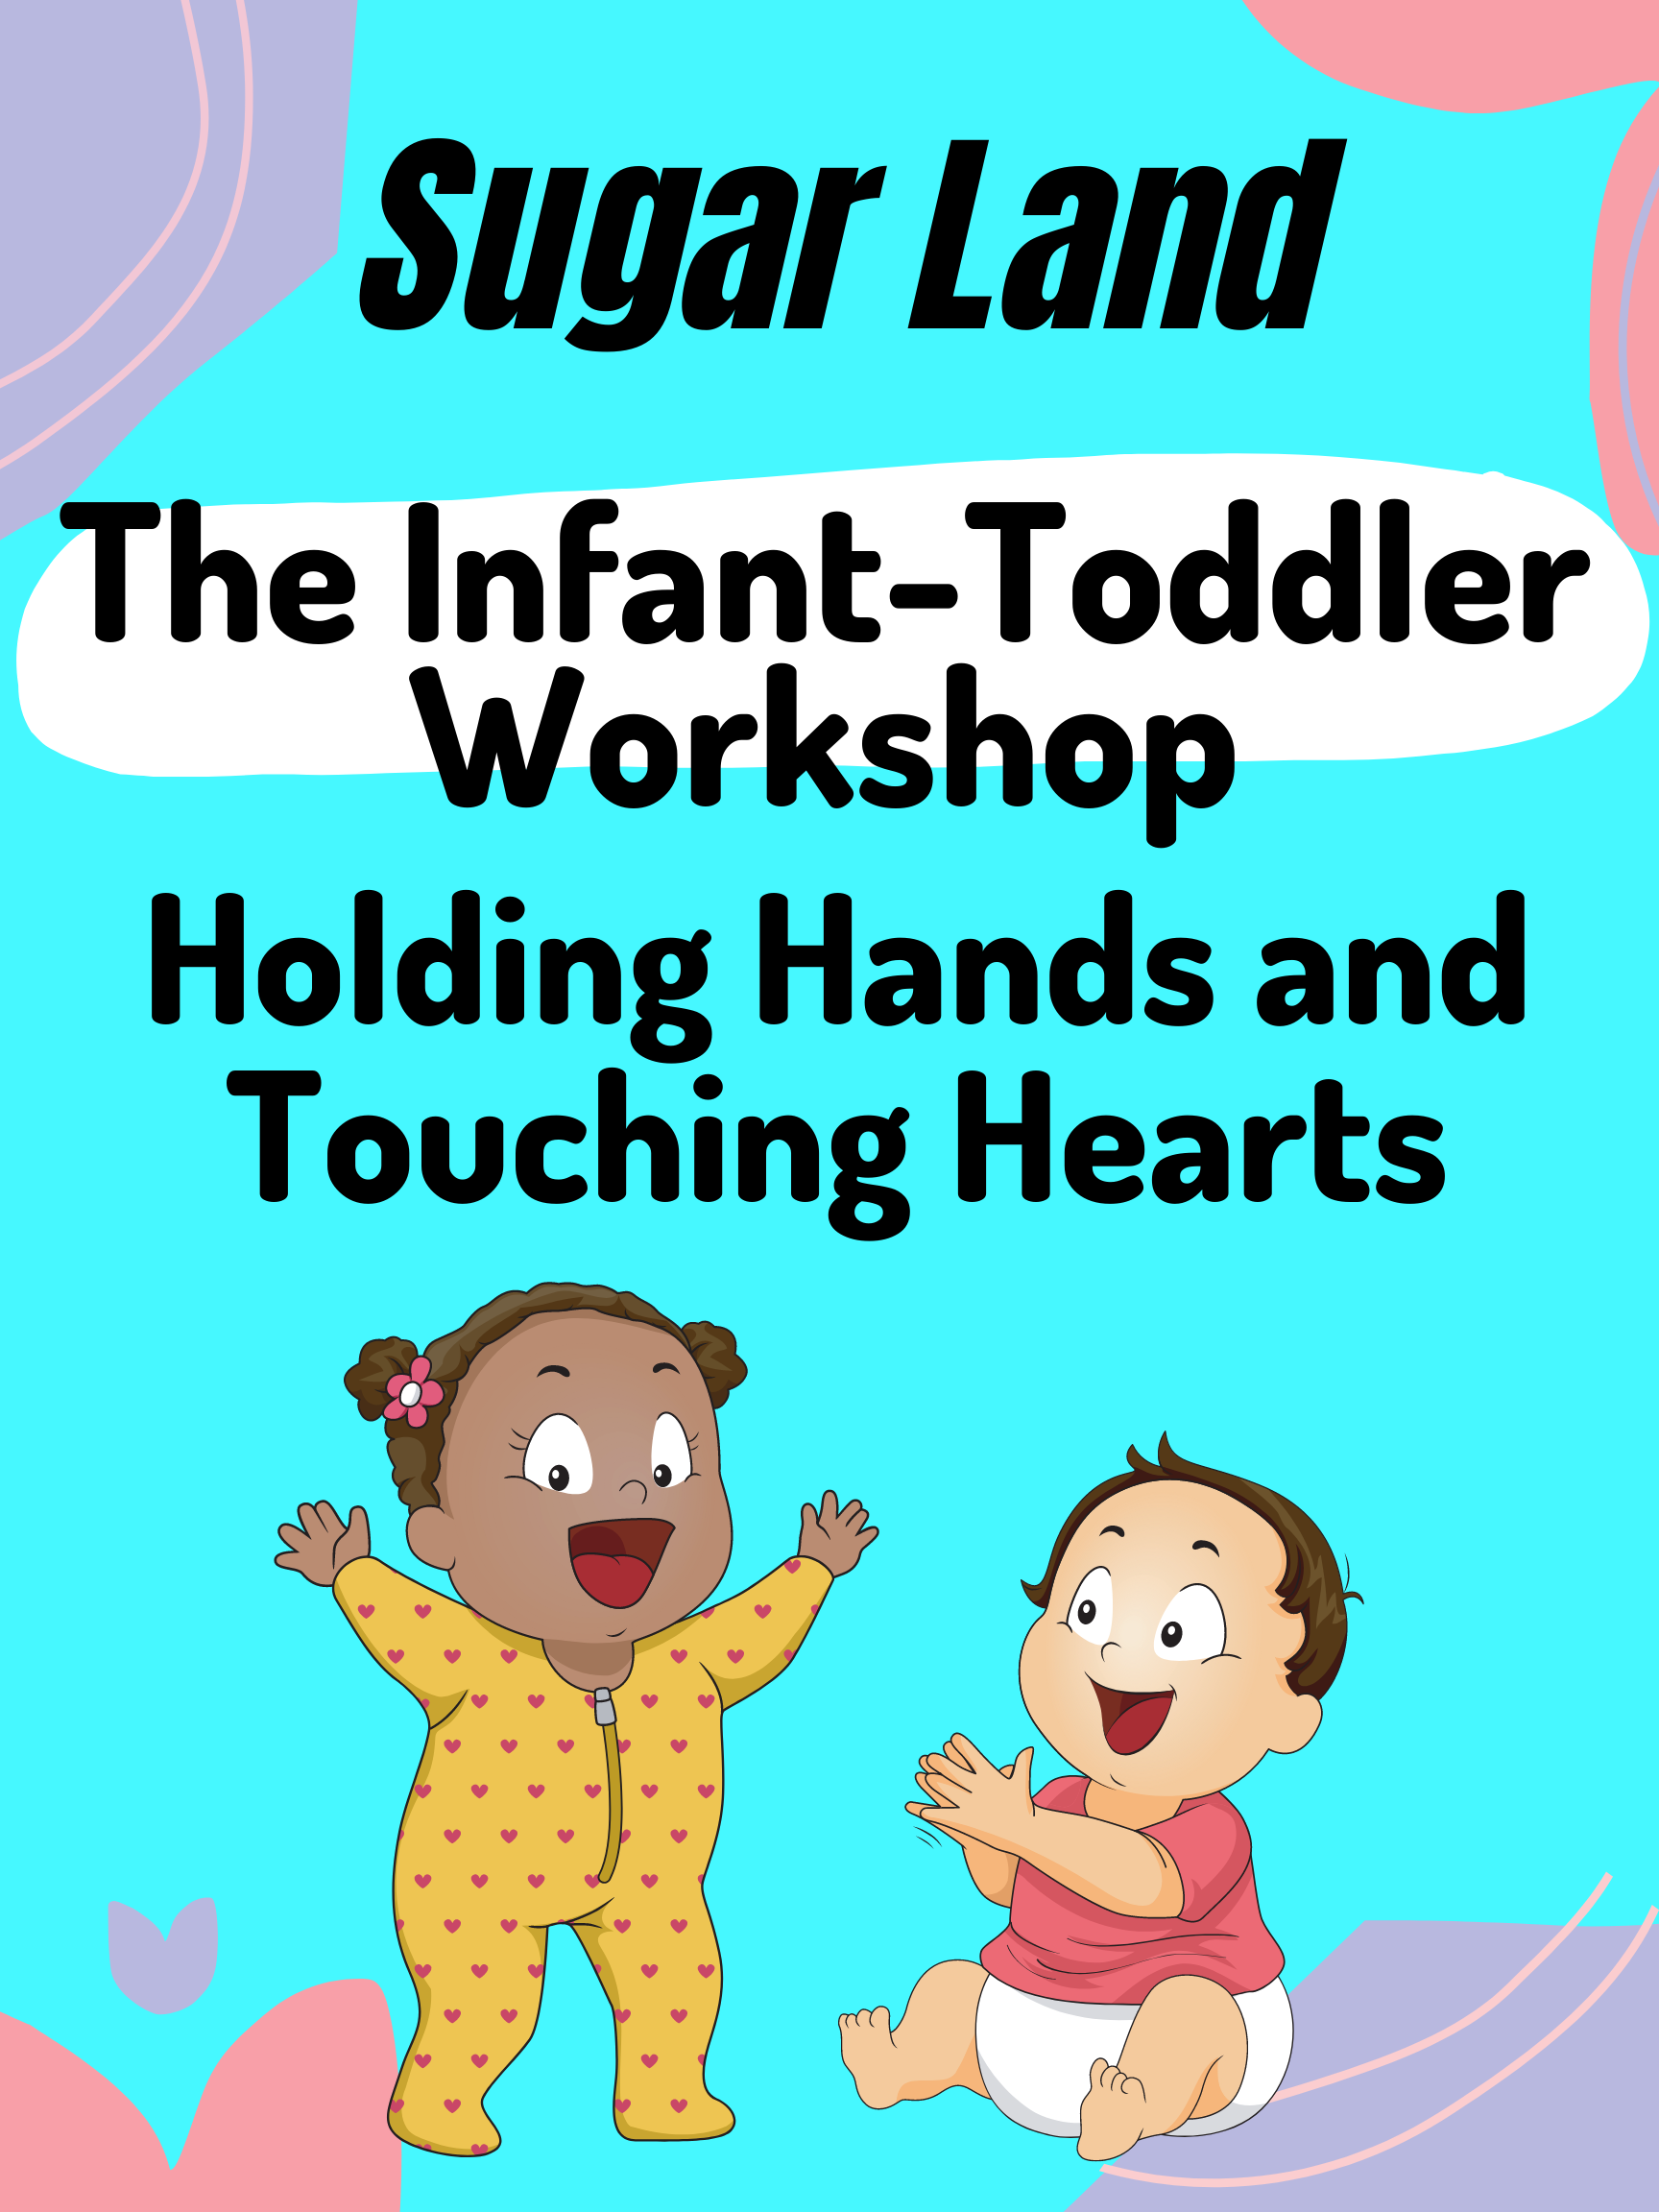 Image for The Infant-Toddler Workshop: Holding Hands and Touching Hearts - SUGAR LAND